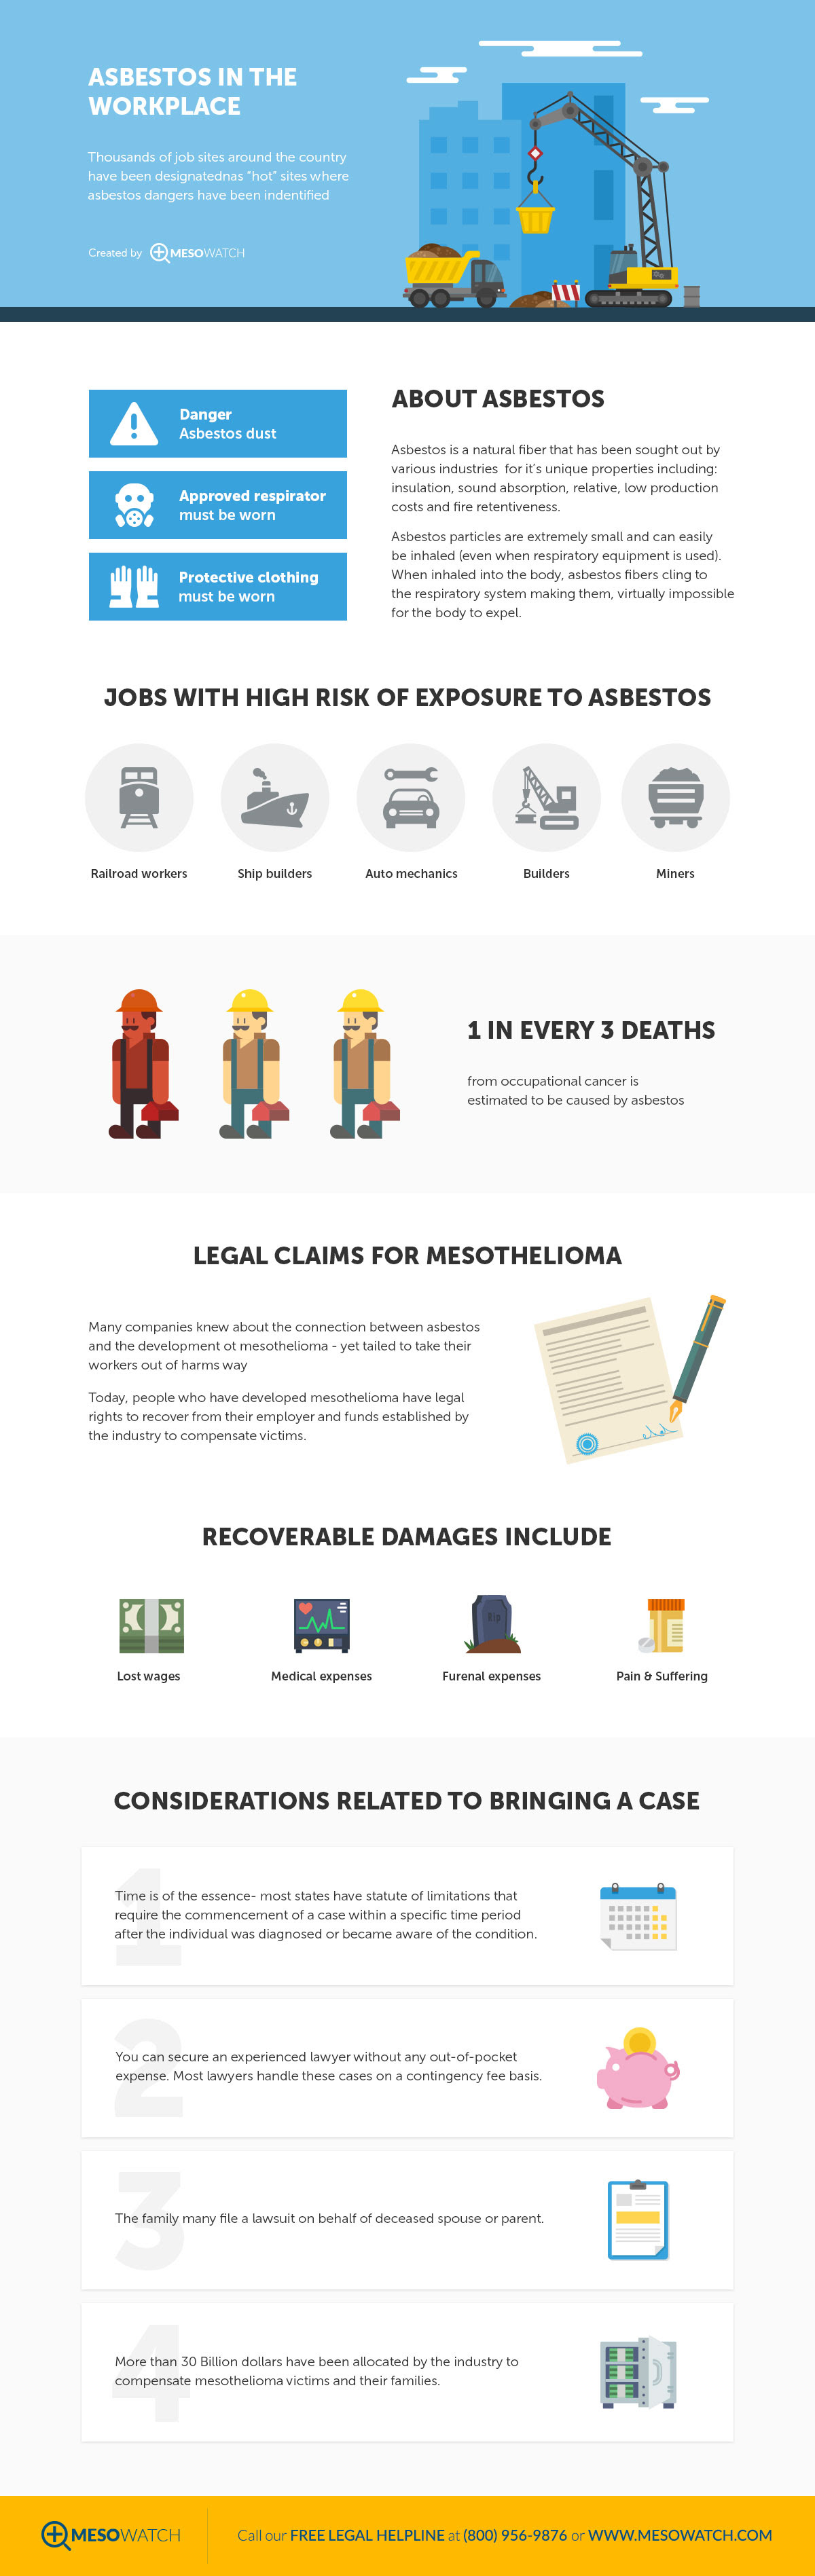 Asbestos Law Firm Mesowatch Launches to Fight for Mesothelioma Victims